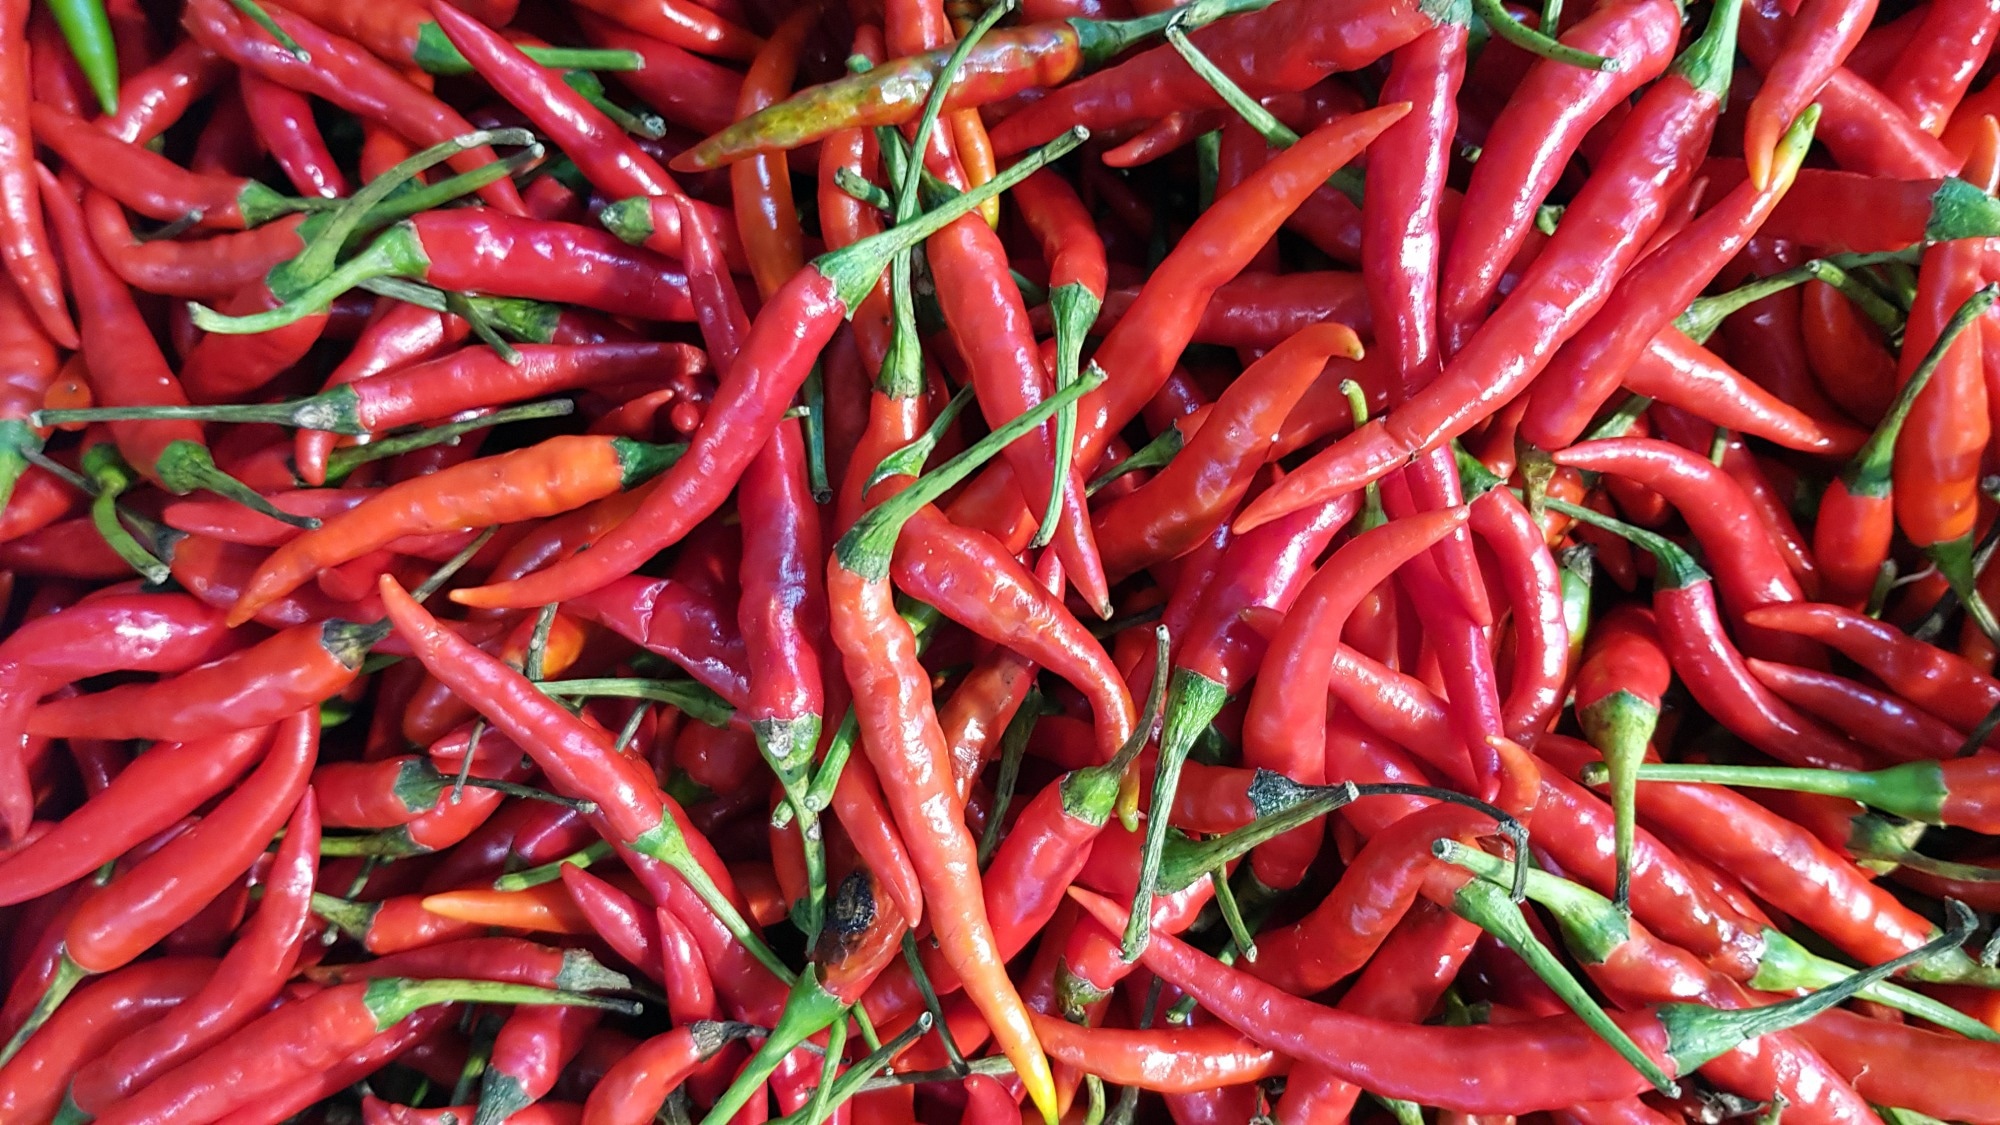 Study: More spice, less salt: how capsaicin affects liking for and perceived saltiness of foods in people with smell loss. Image Credit: joel bubble ben / Shutterstock.com